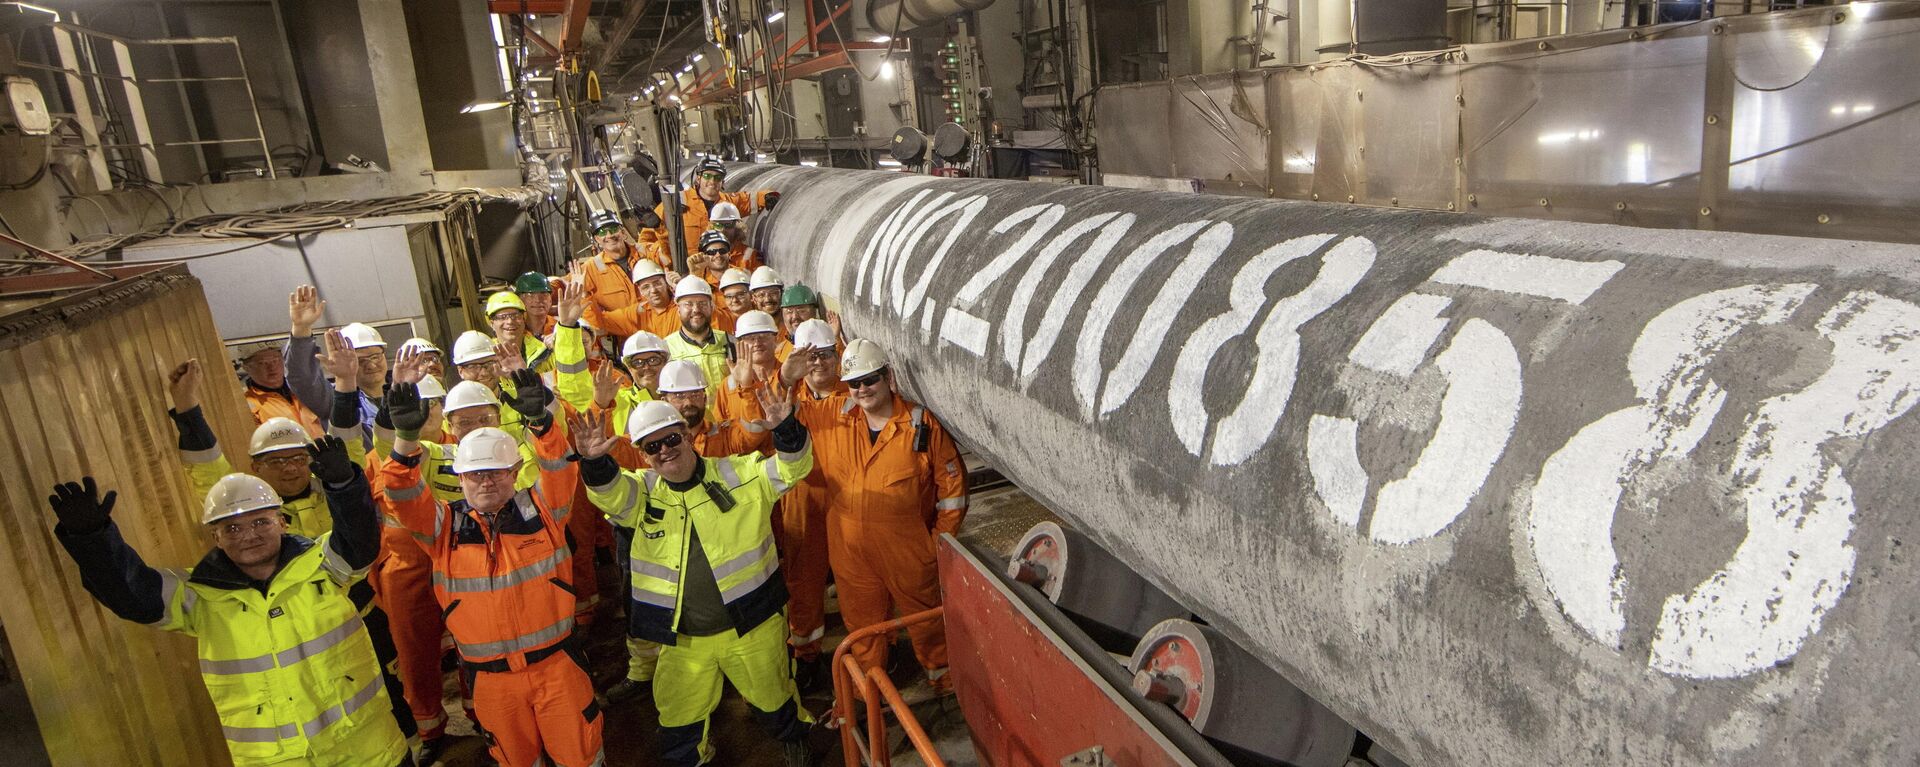 Specialists pose for a picture after welding the last pipe of the Nord Stream 2 gas subsea pipeline onboard the laybarge Fortuna in German waters in the Baltic Sea, September 6, 2021 - Sputnik International, 1920, 03.11.2021